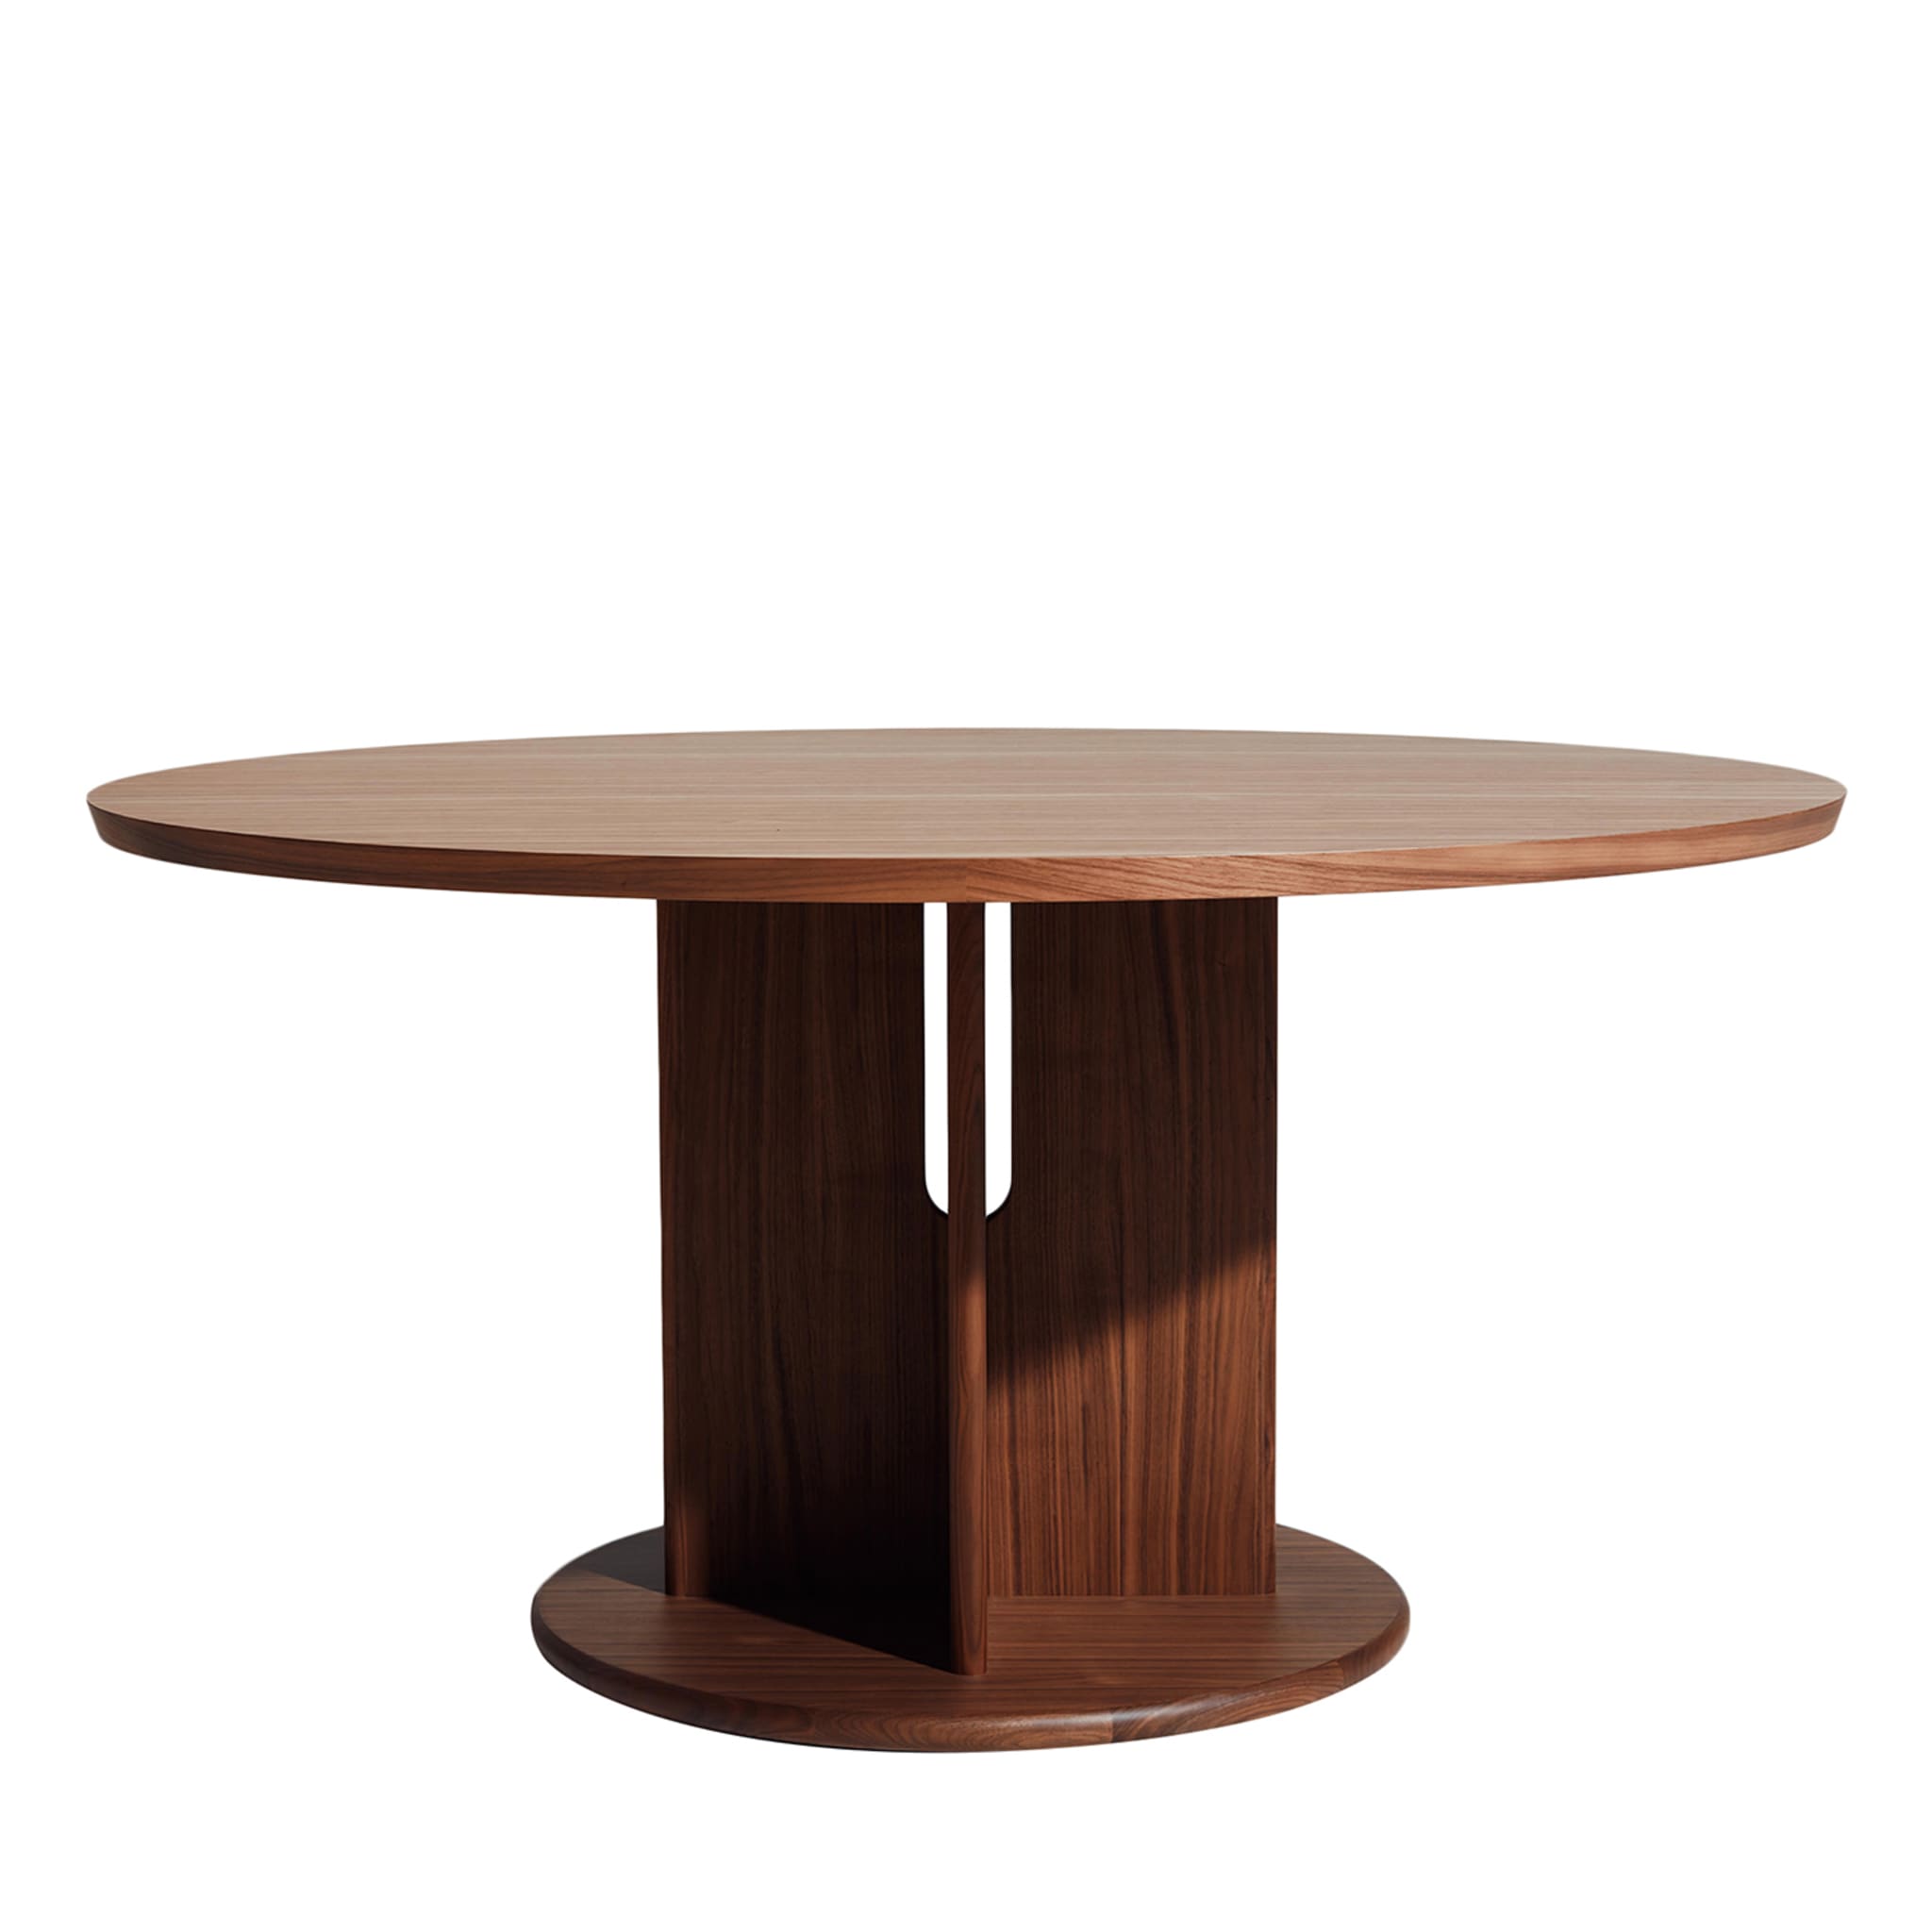 Intersection Round Dining Table by Neri&Hu - Main view